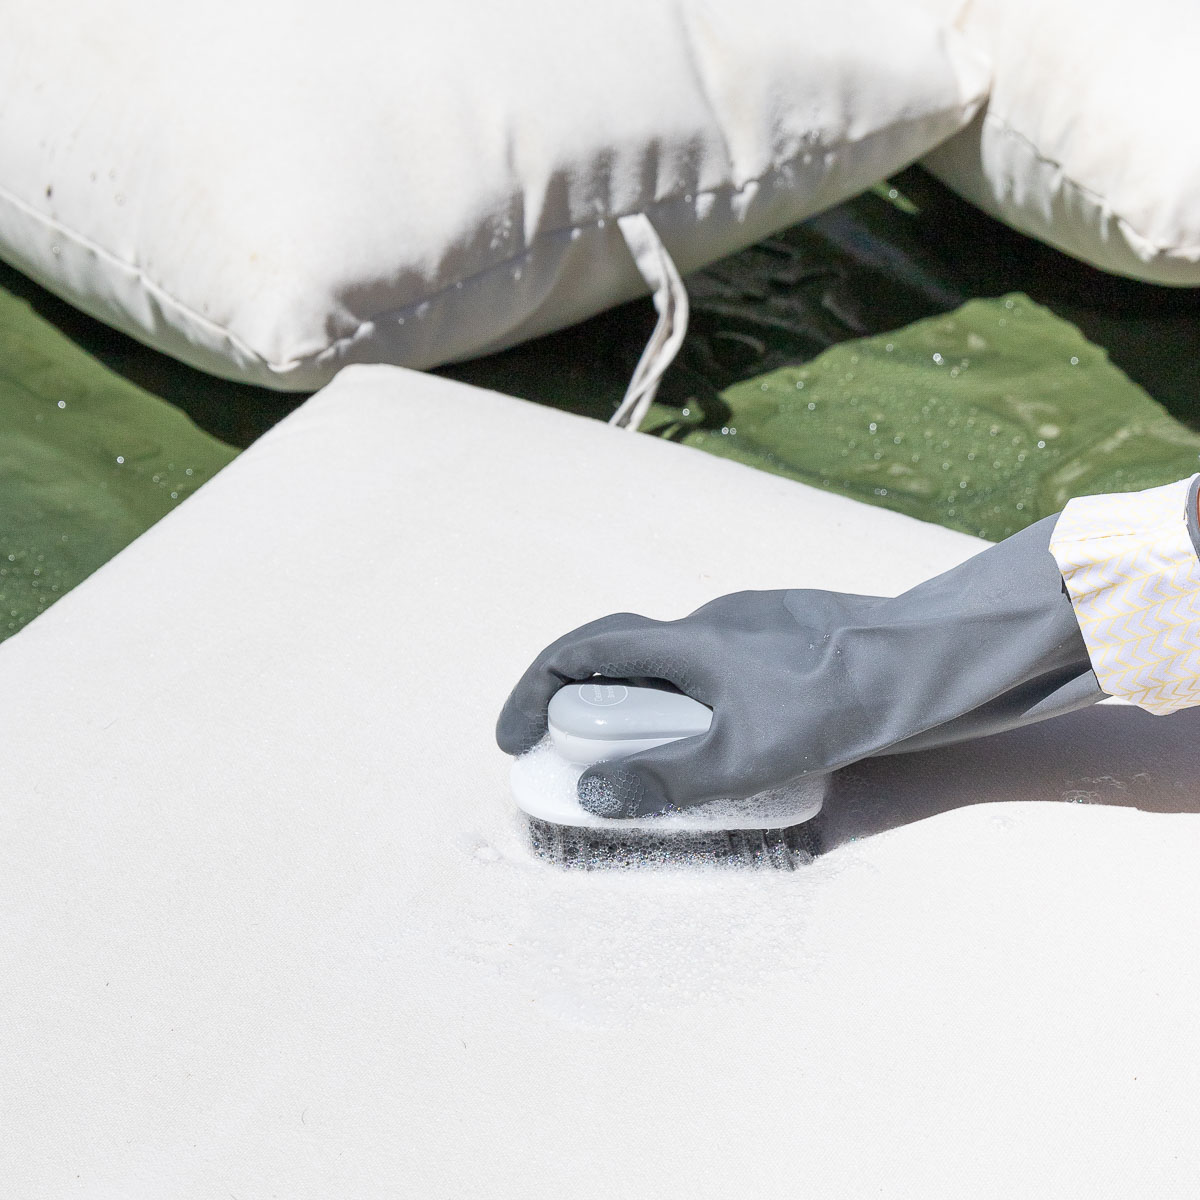 How To Clean Outdoor Cushions With Borax